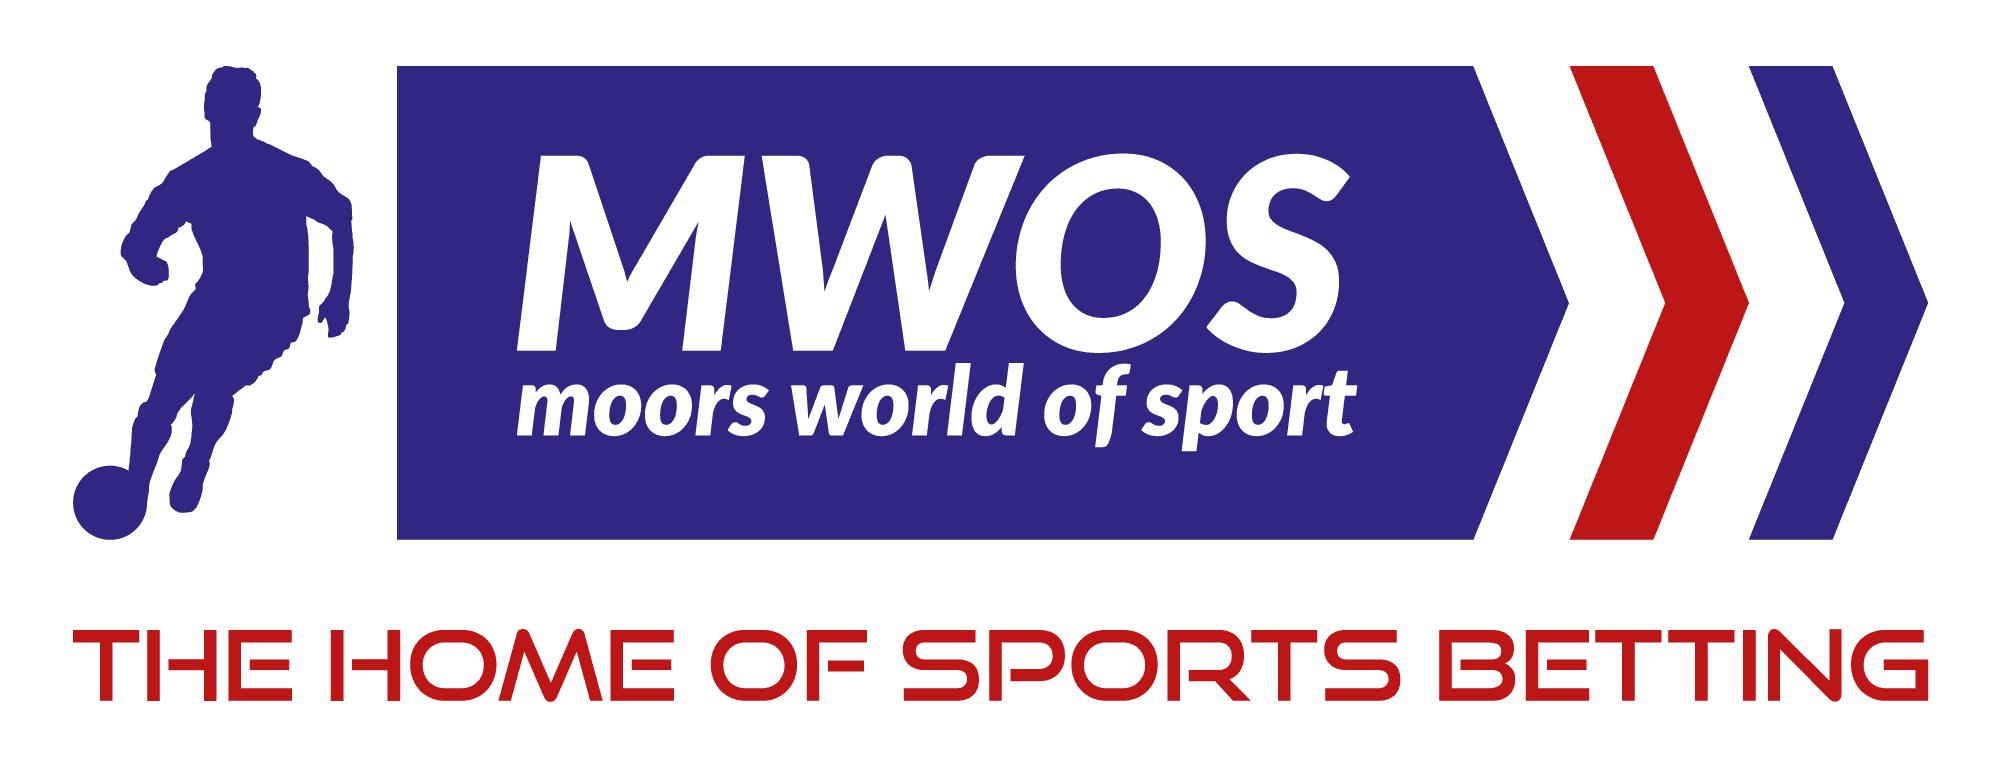 mwos betting